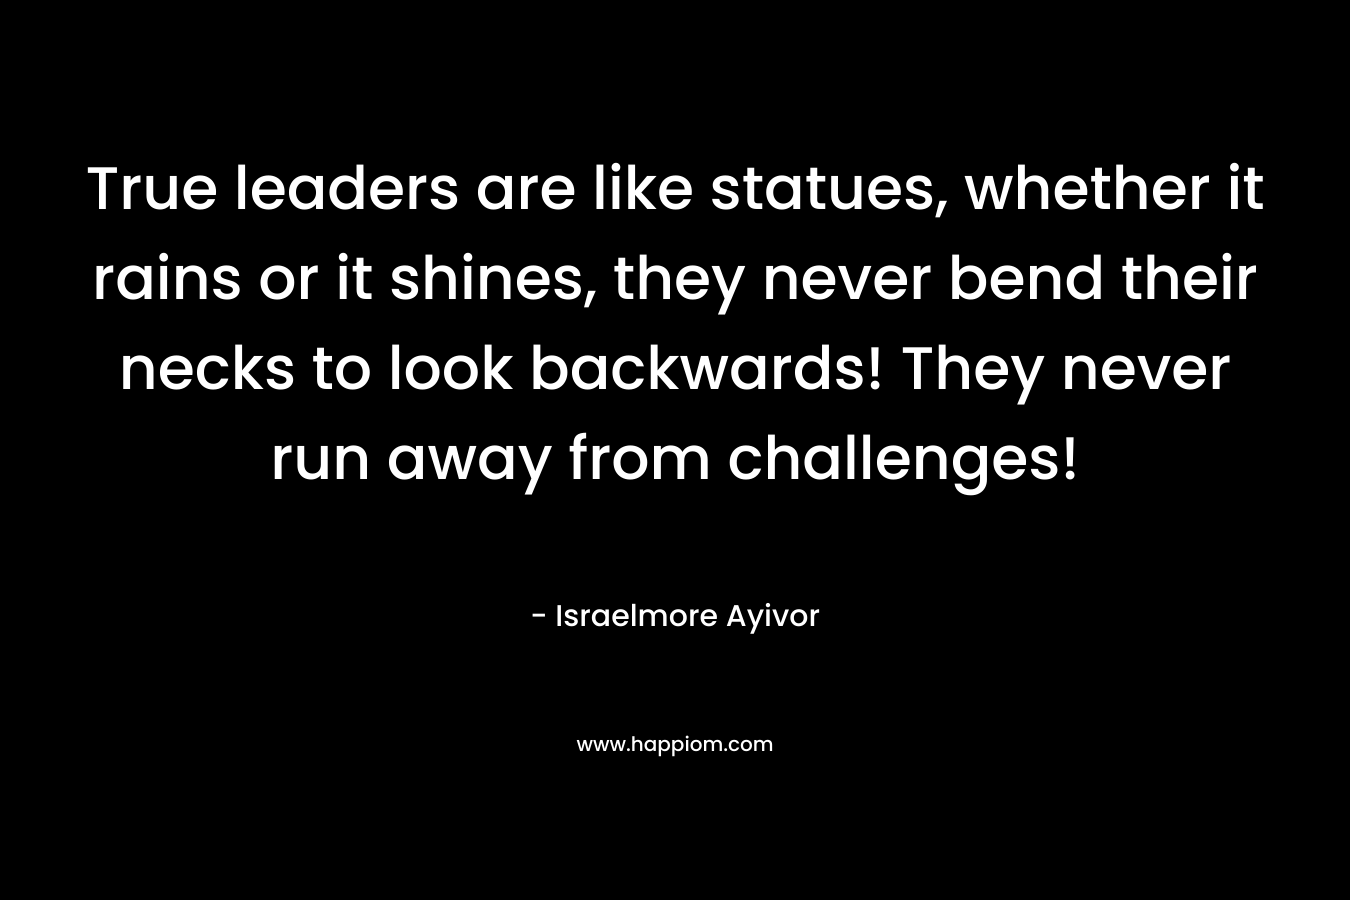 True leaders are like statues, whether it rains or it shines, they never bend their necks to look backwards! They never run away from challenges! – Israelmore Ayivor